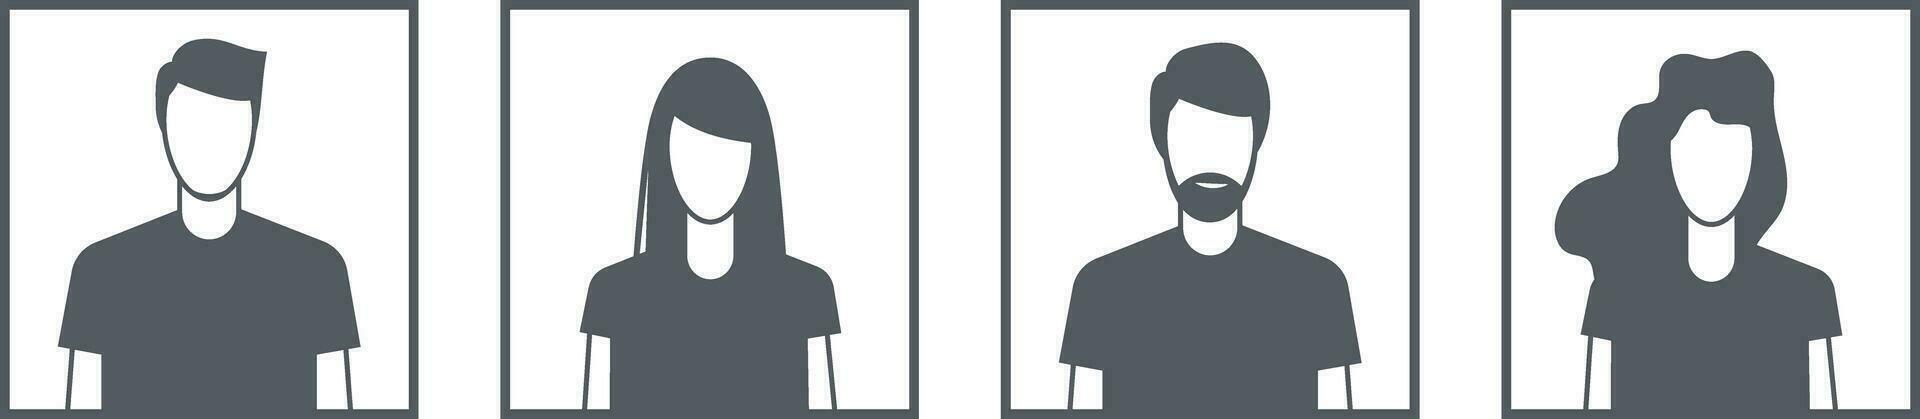 User icon vector. People head avatar illustration. Man and woman face sign for web design or mobile app. vector